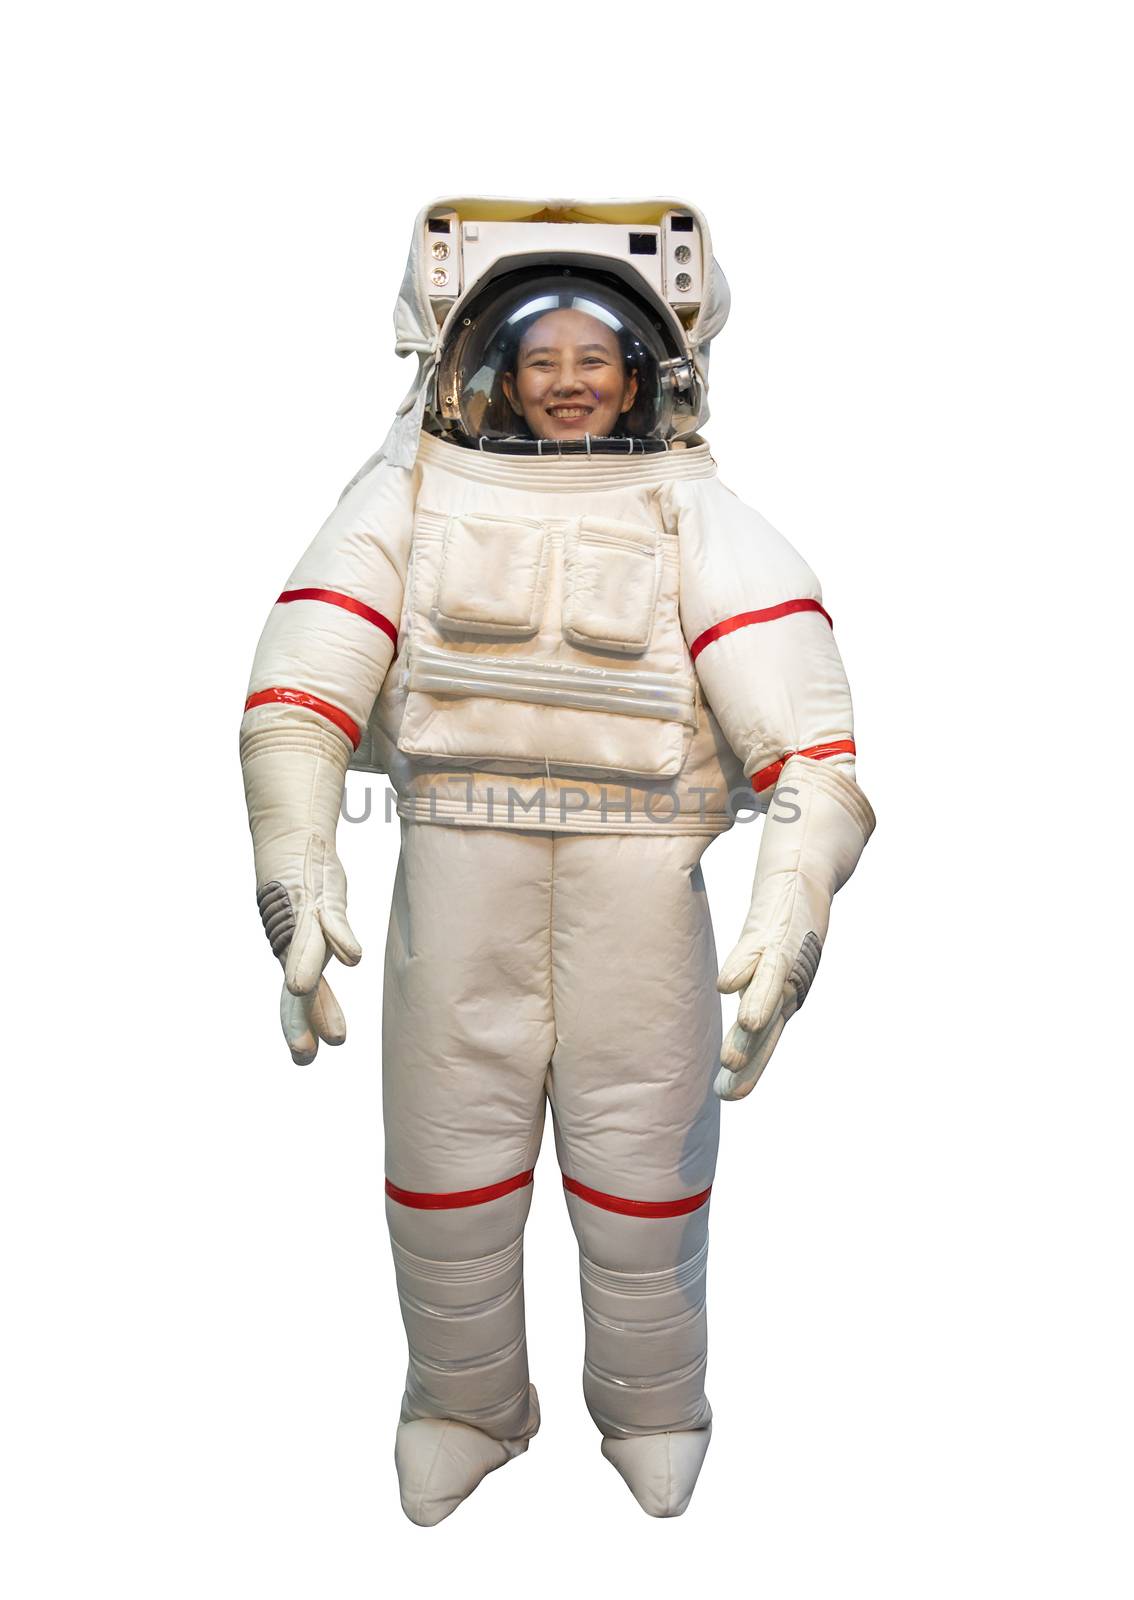 happy Asian woman with big smile in white astronaut suit and astronaut helmet dreaming to be spacewoman isolate on white background with clipping path by asiandelight